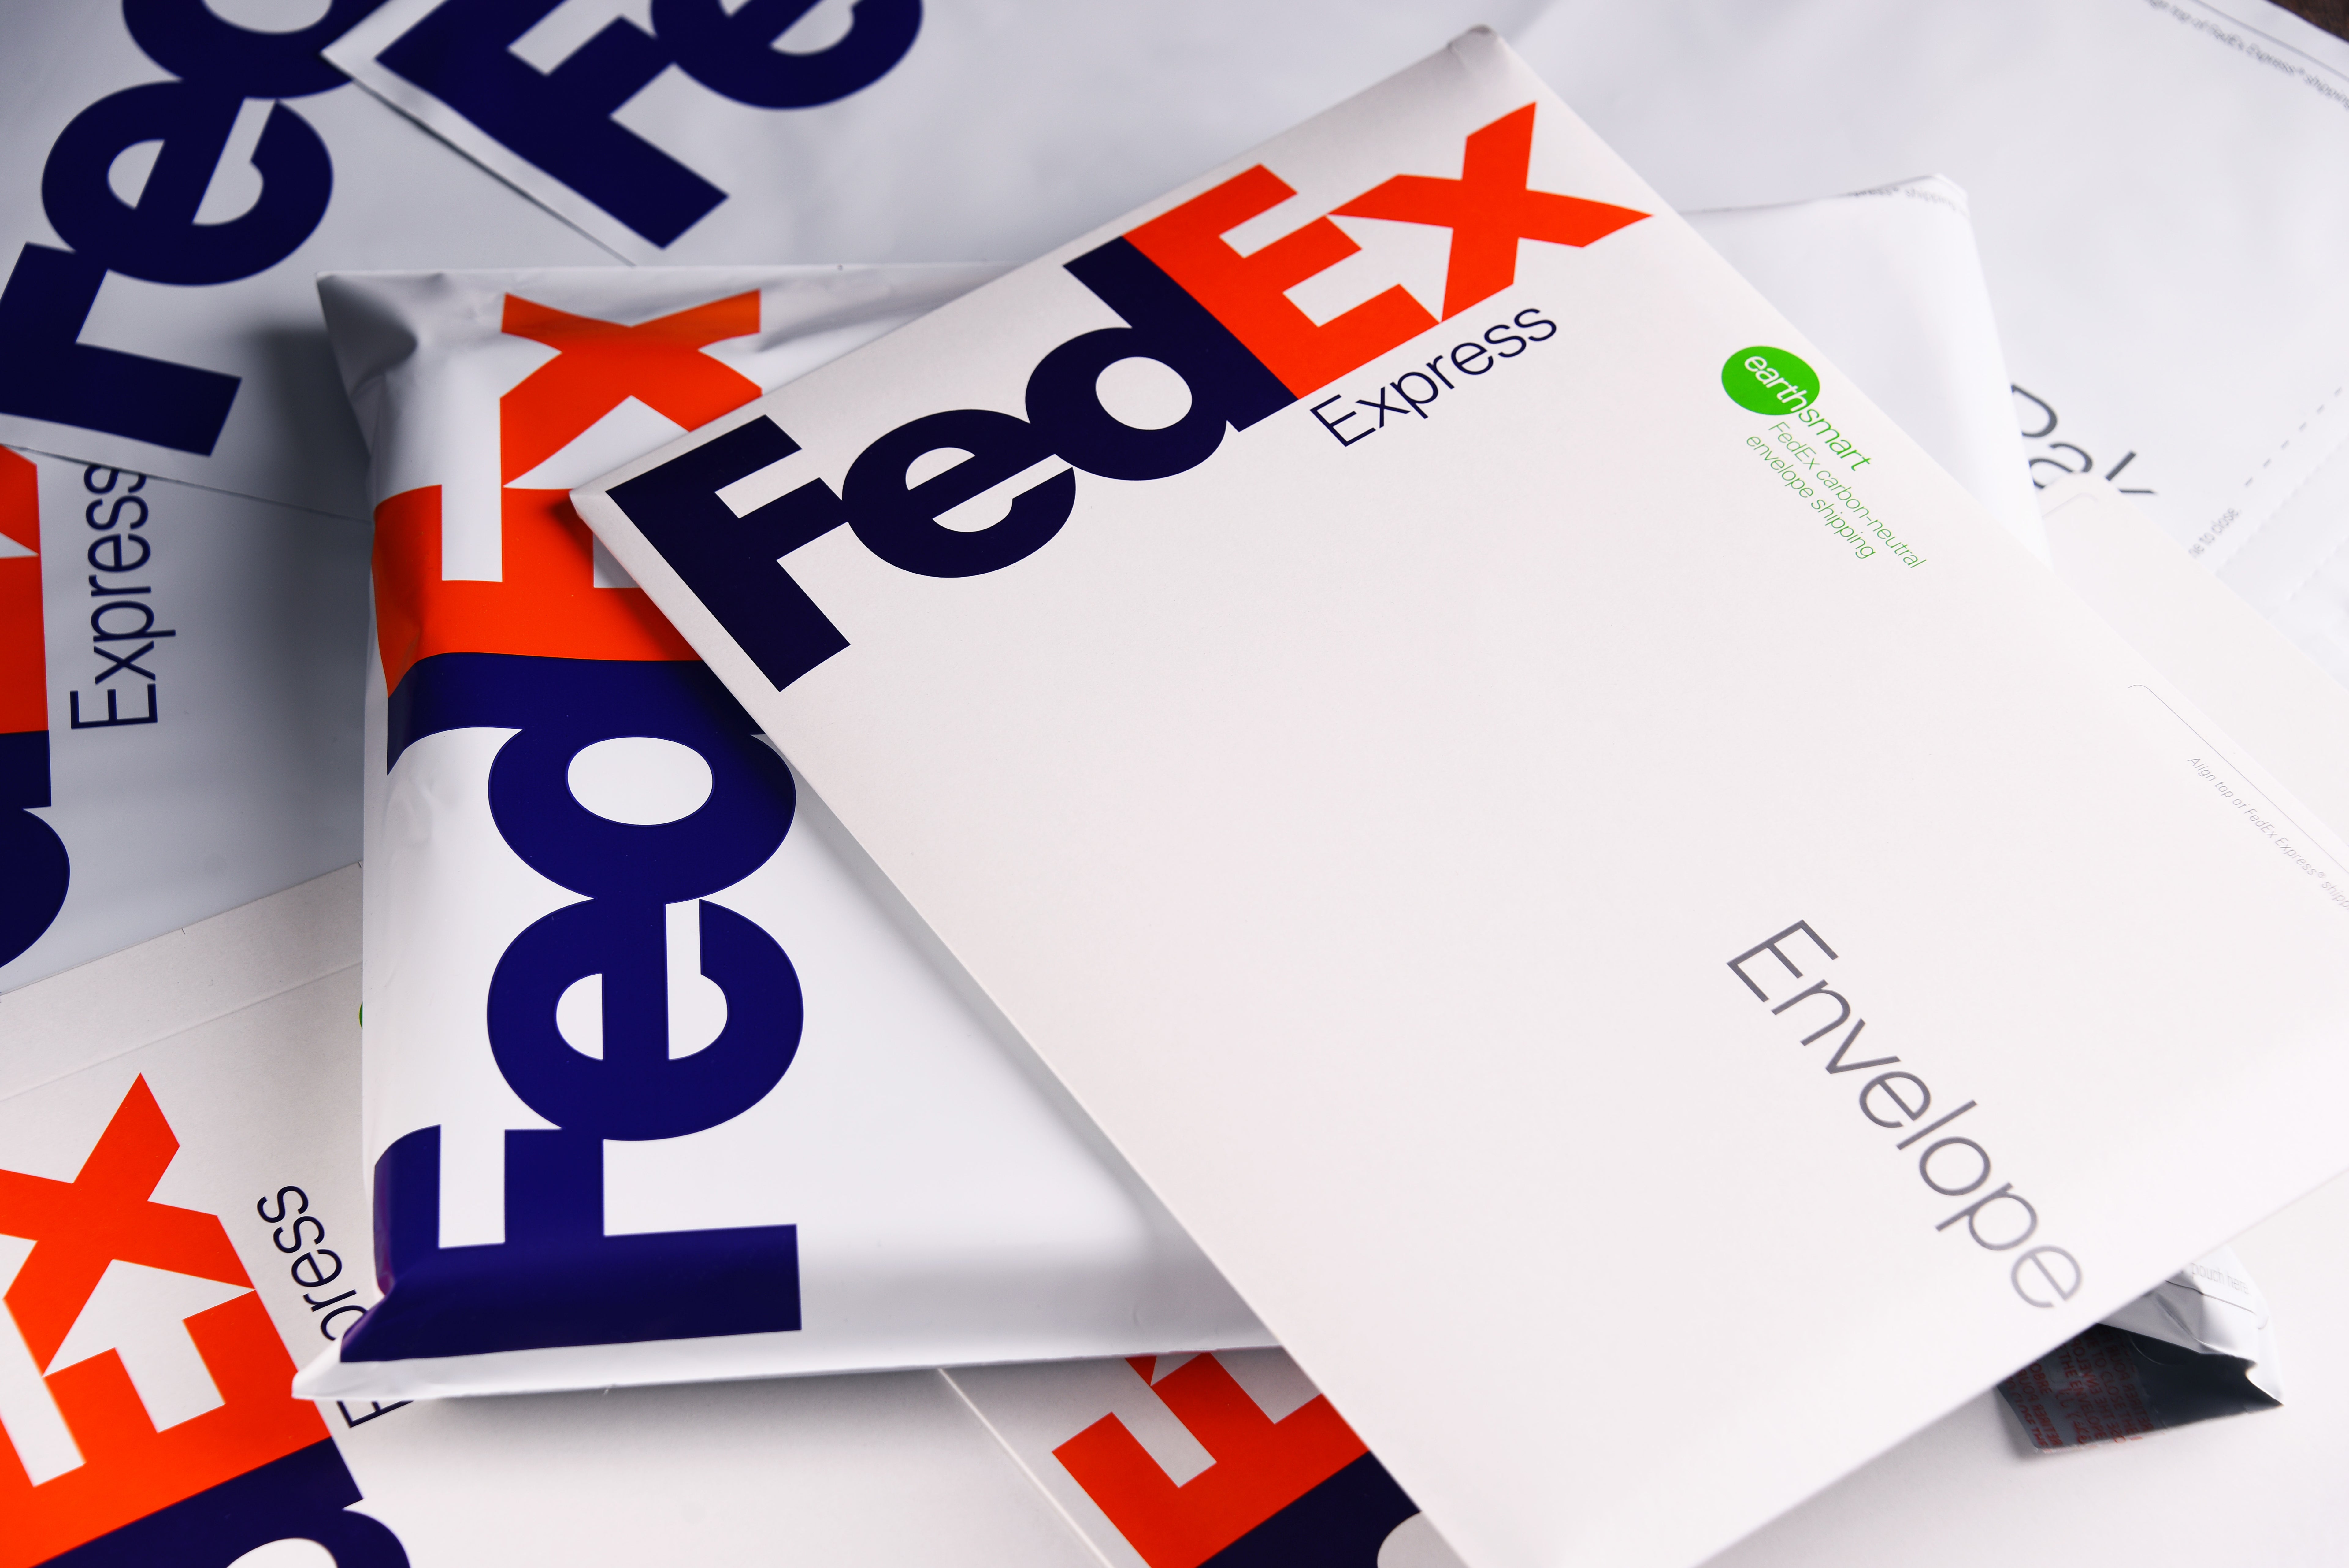 FedEx Q4 Earnings Highlights: Revenue Miss, EPS In-Line, 2023 Guidance, Share Buyback And More